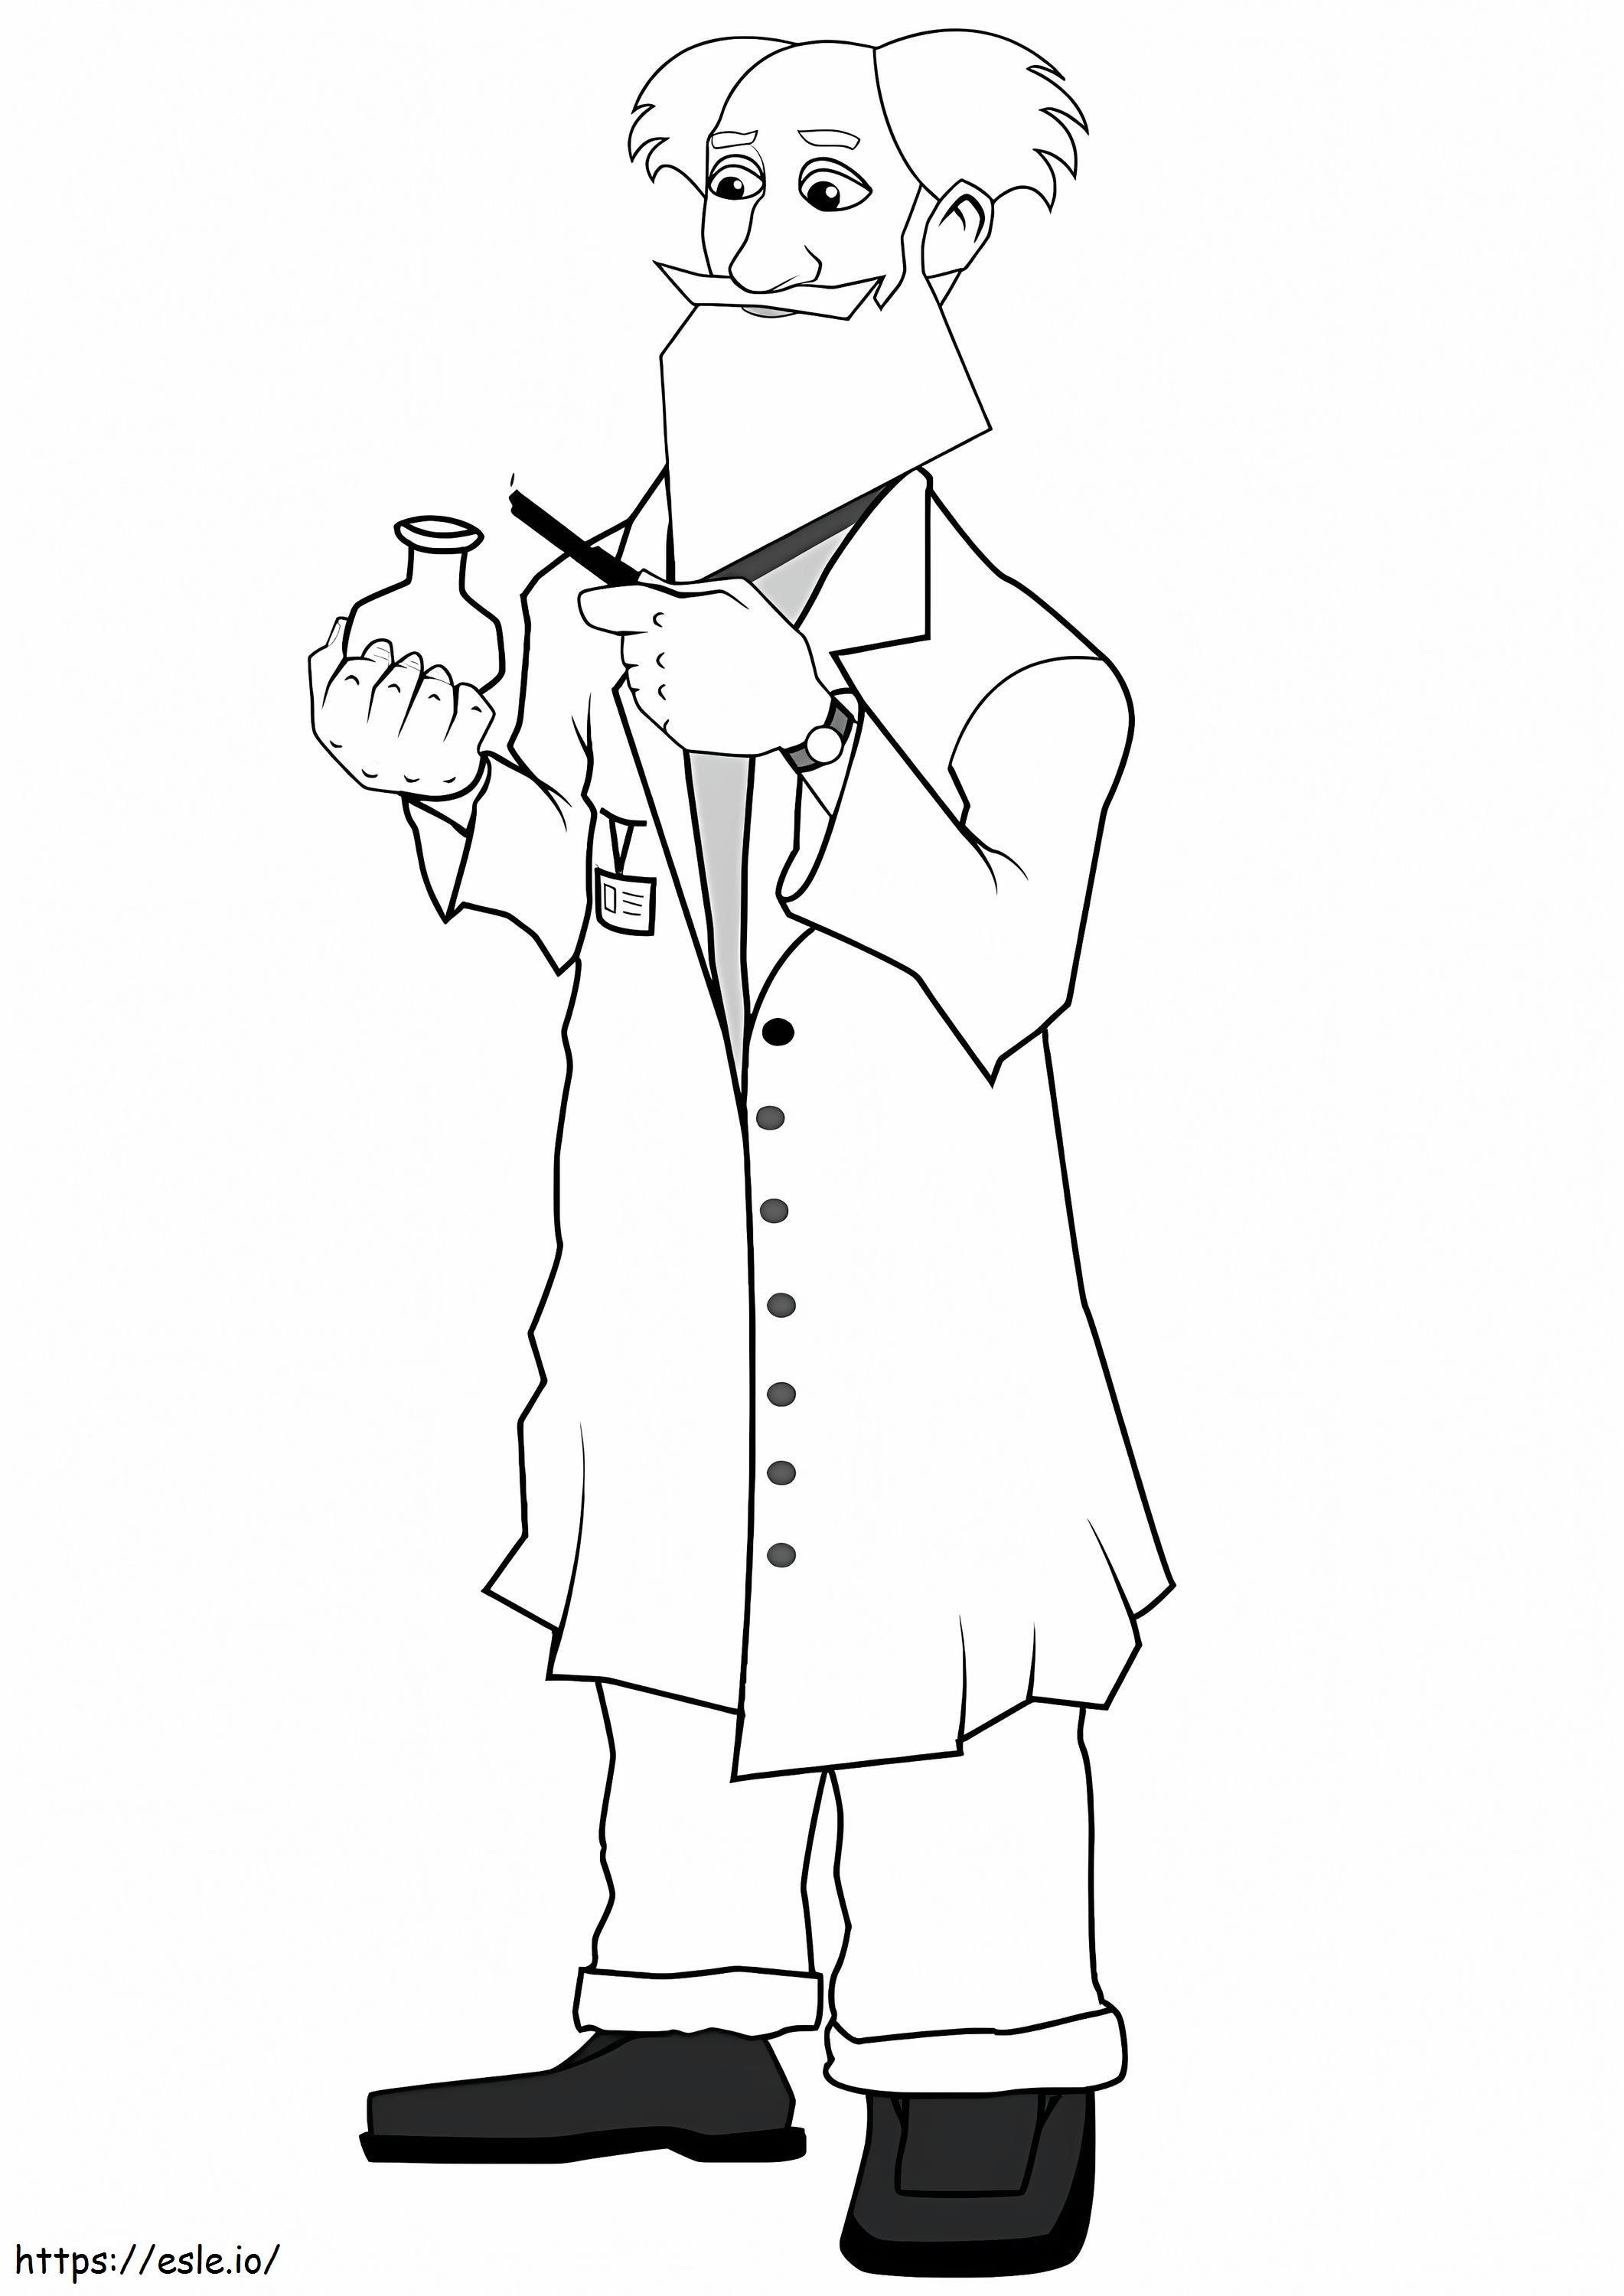 Old Scientist coloring page